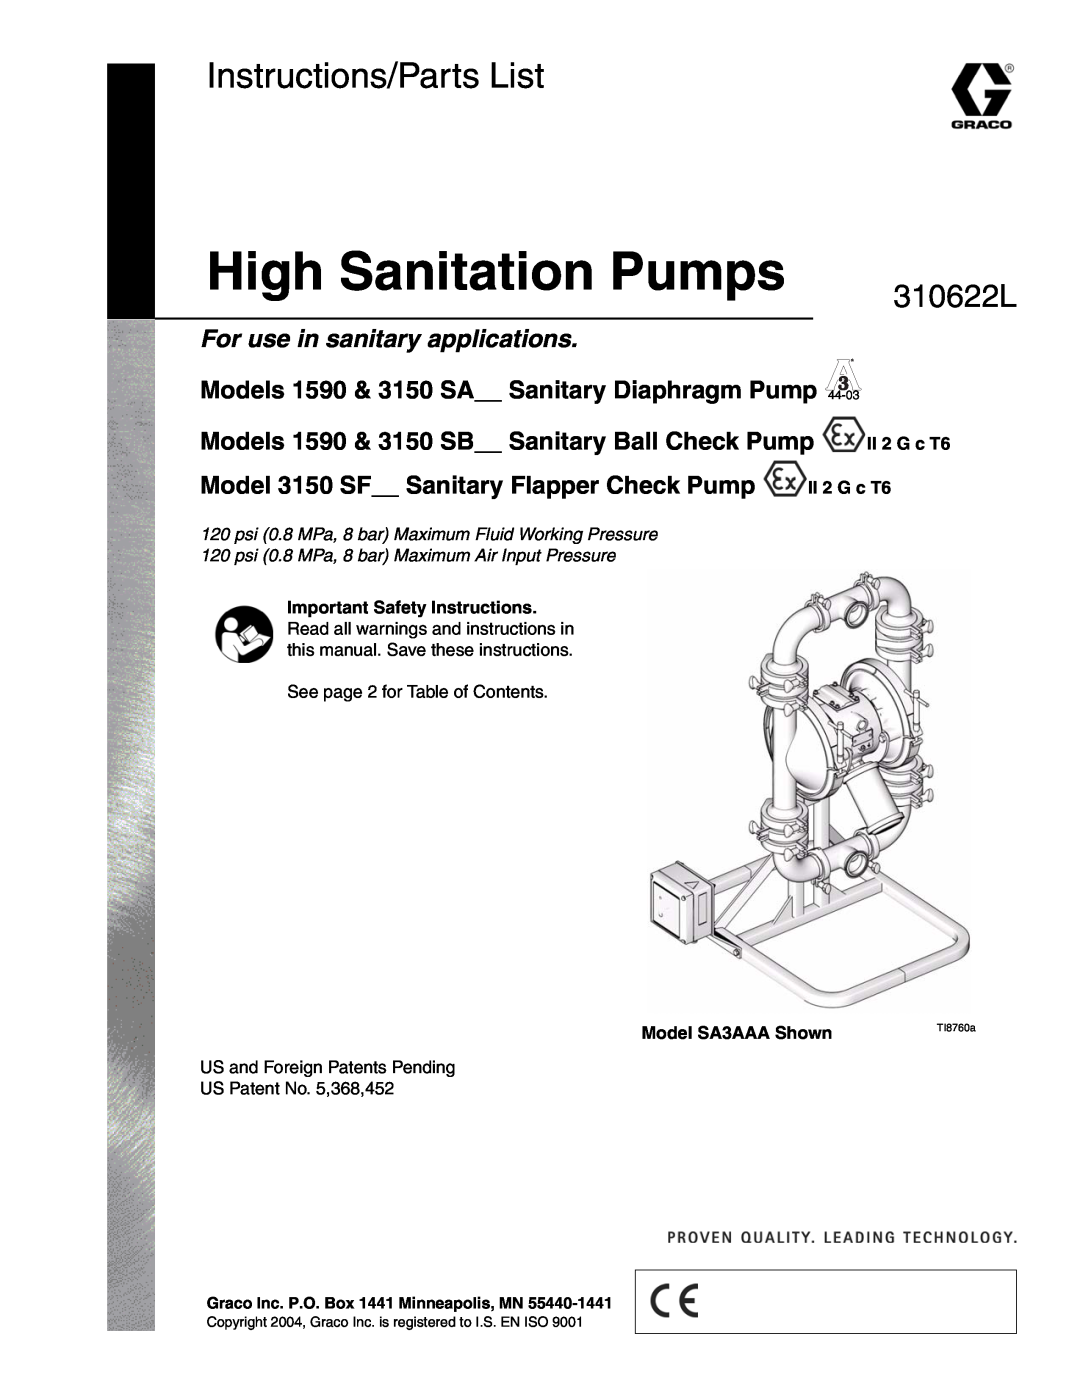 Haier 3150 SF important safety instructions Model SA3AAA Shown, High Sanitation Pumps, Instructions/Parts List, 310622L 